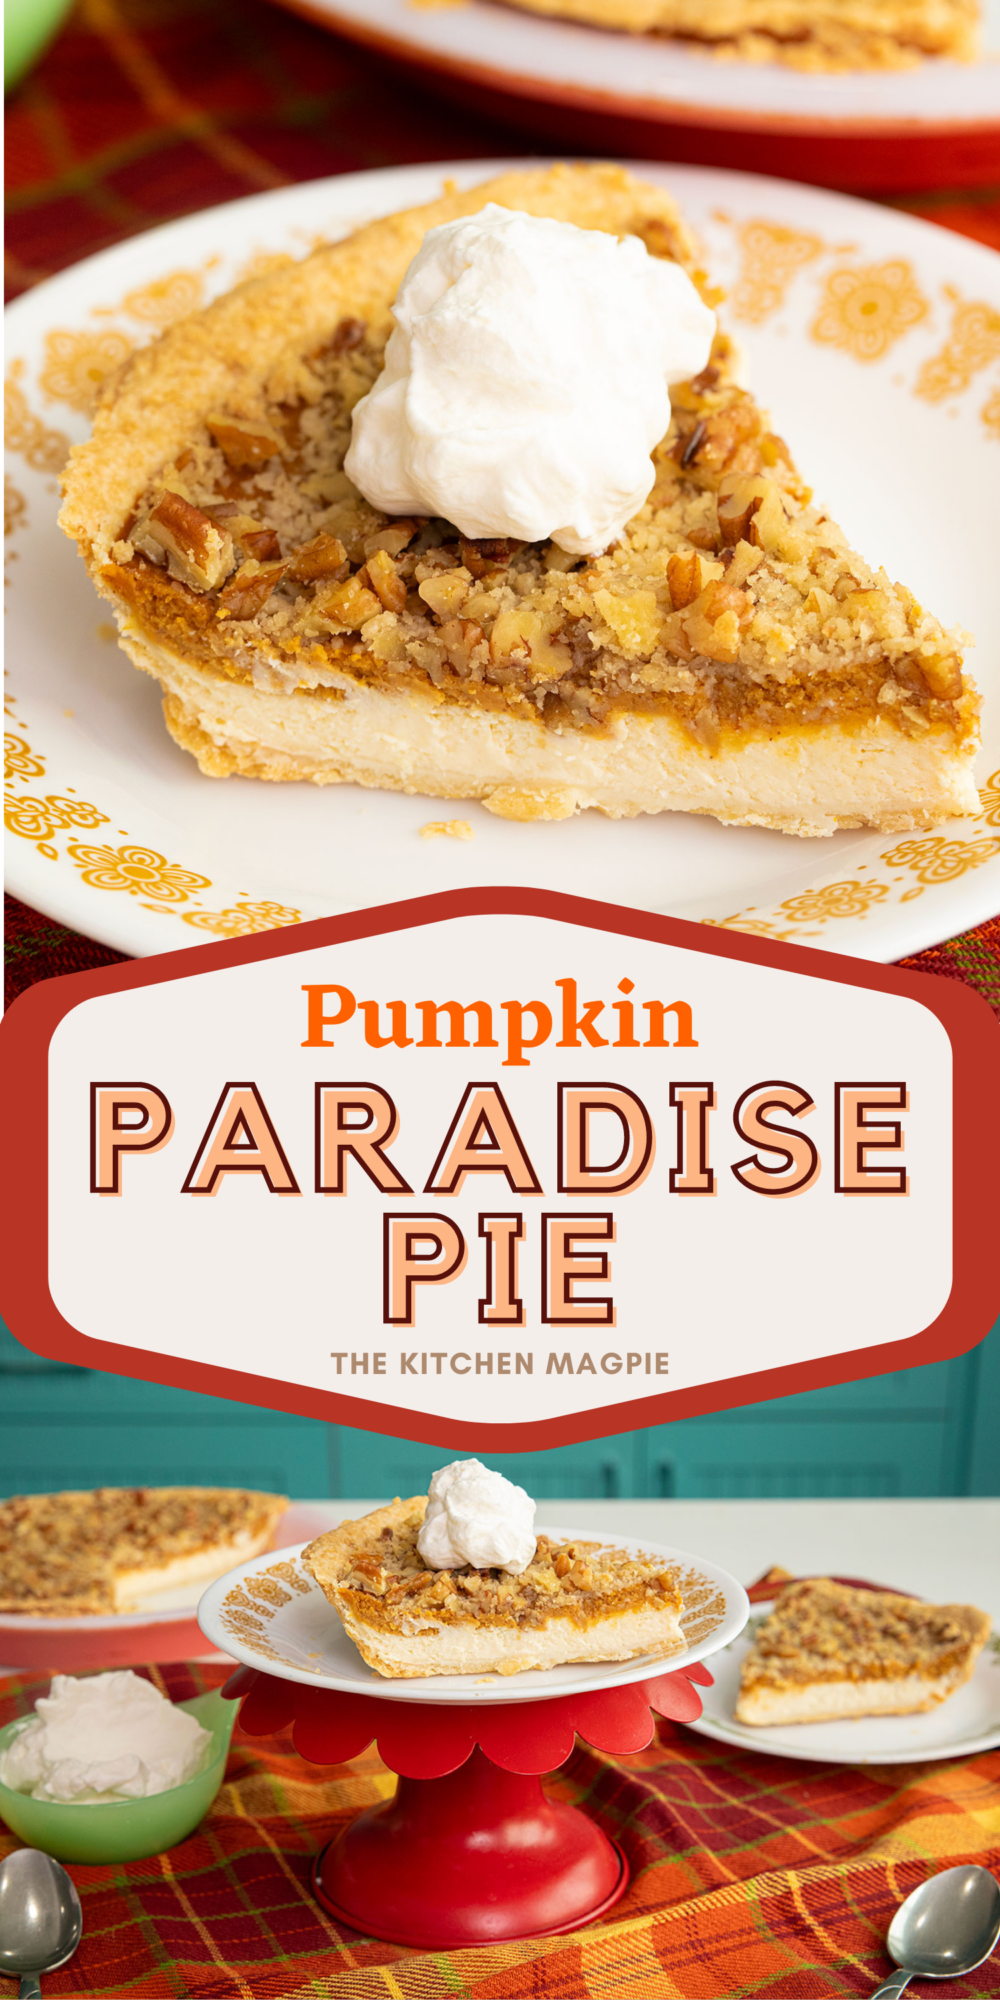 How to make old fashioned Pumpkin Paradise Pie with a crumble pecan struesel topping! This is a great twist on classic pumpkin pie.